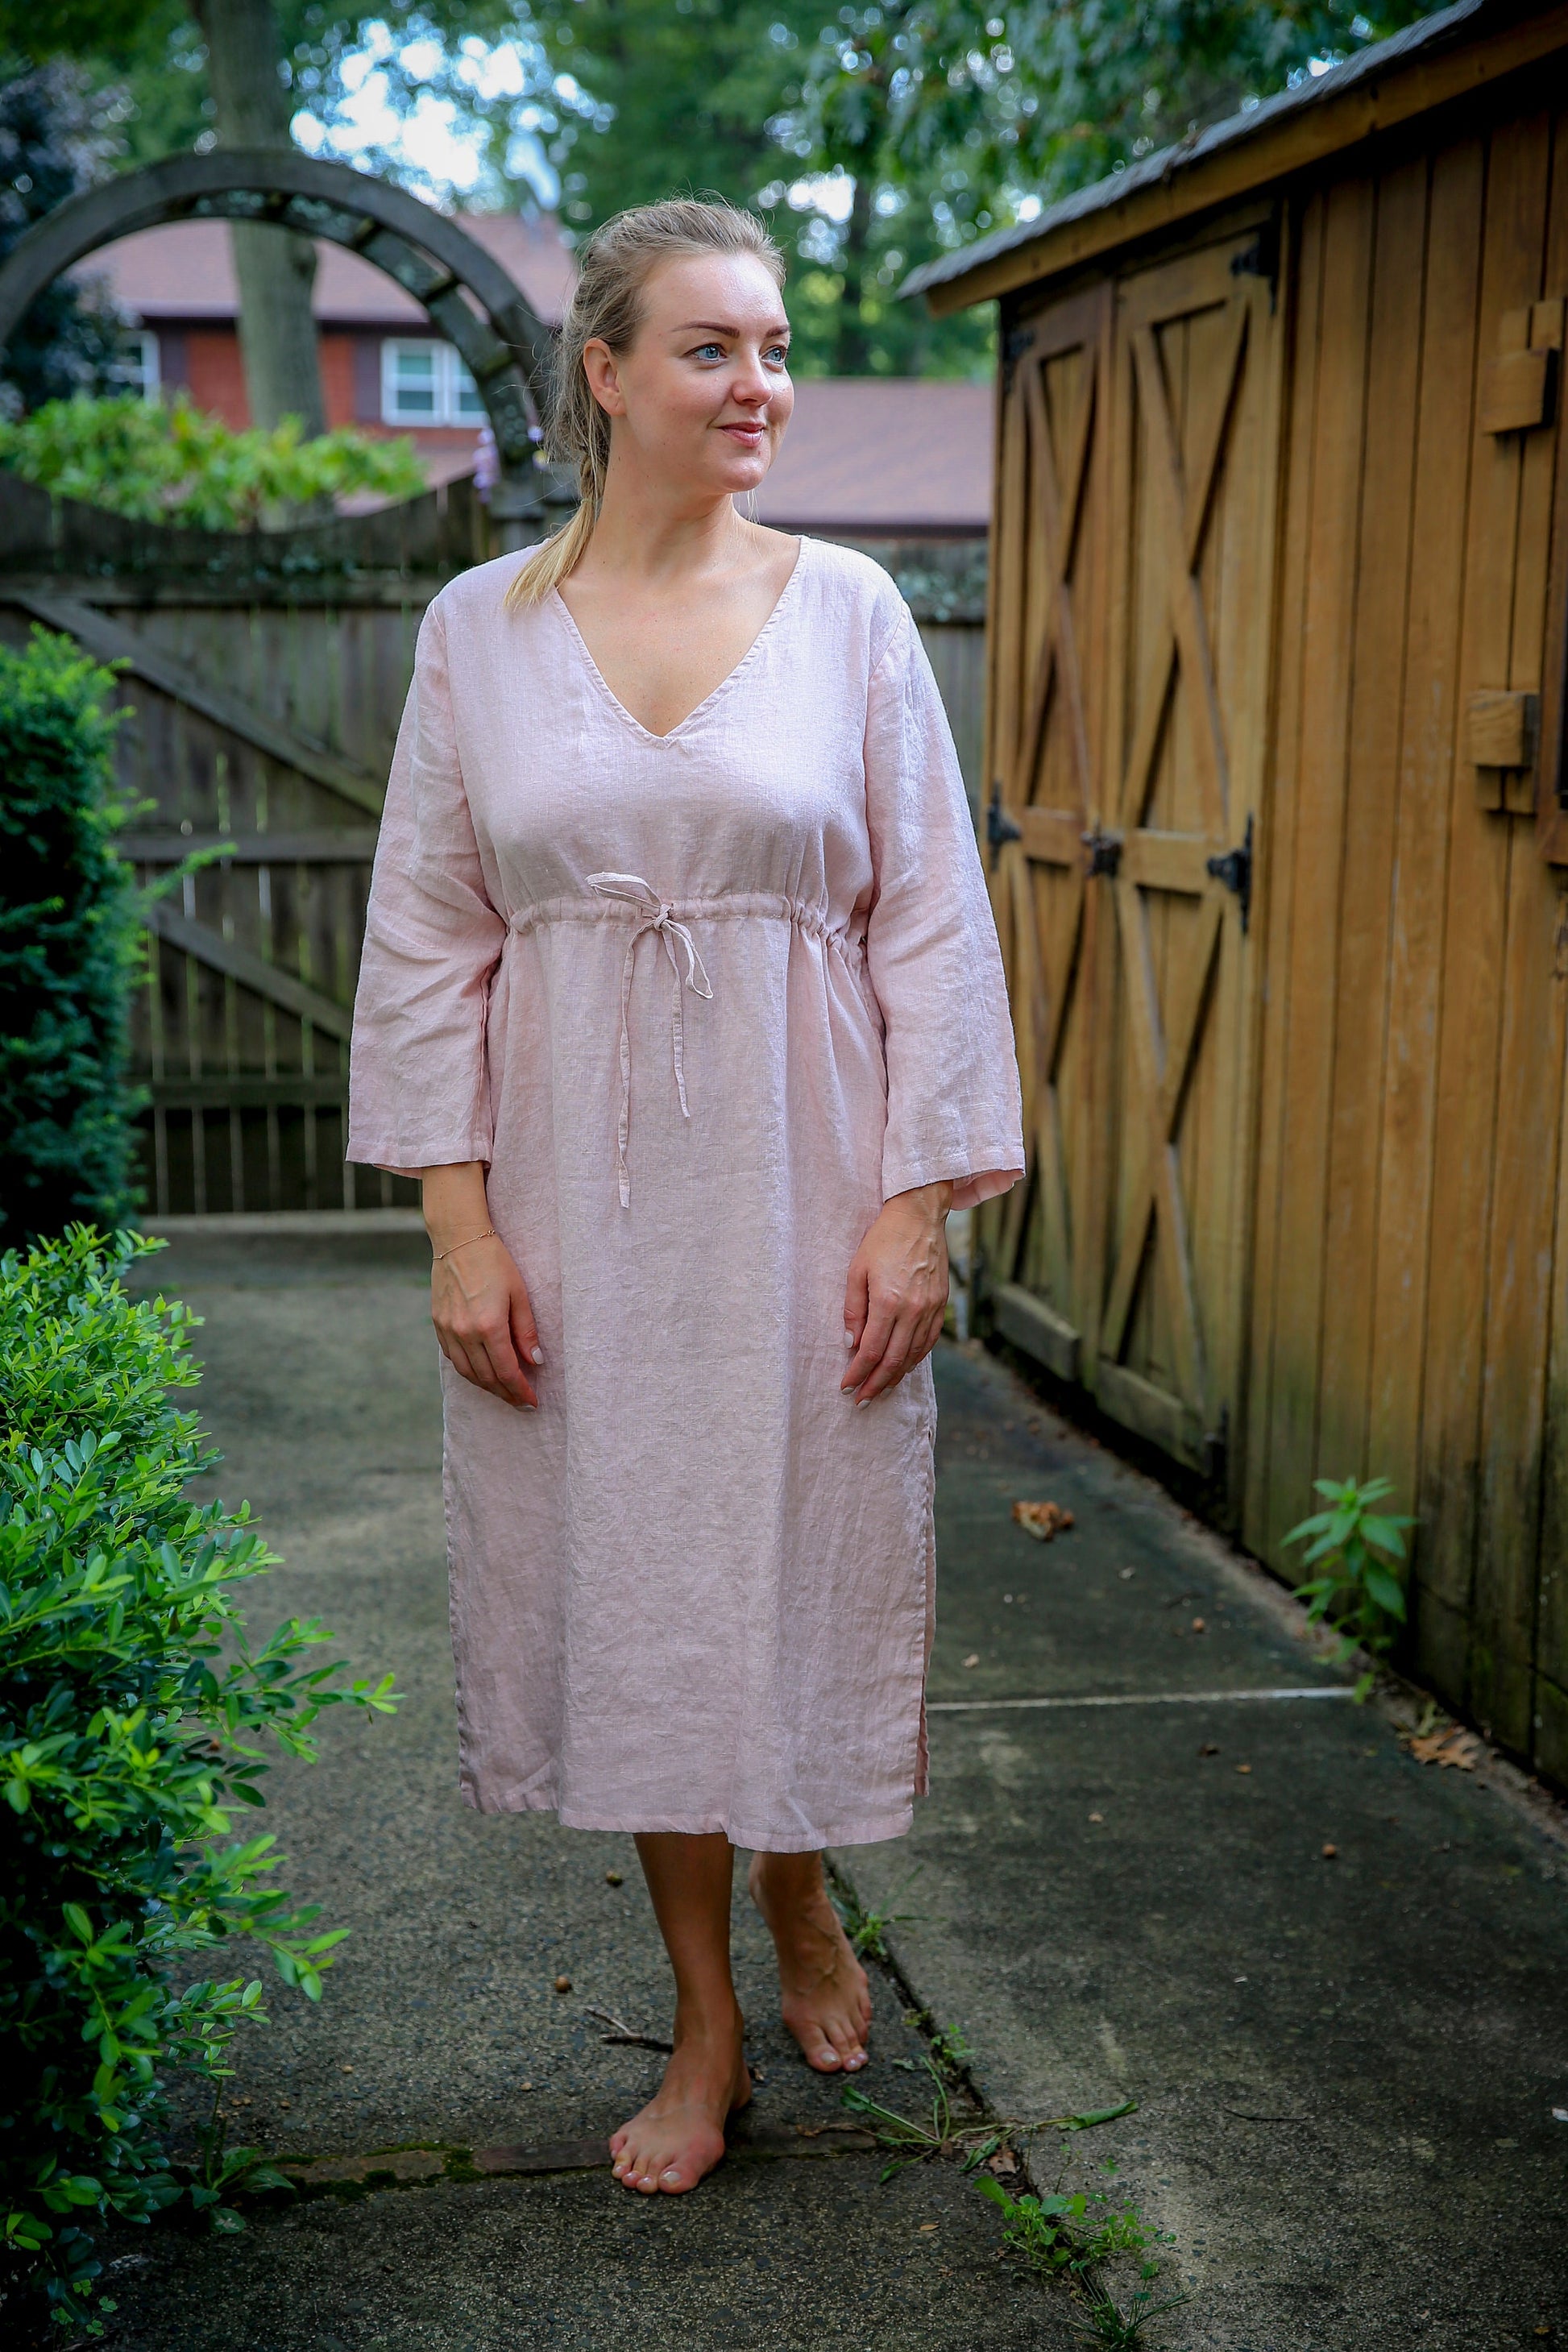 Boho-inspired white linen dress with a hint of dusty rose.